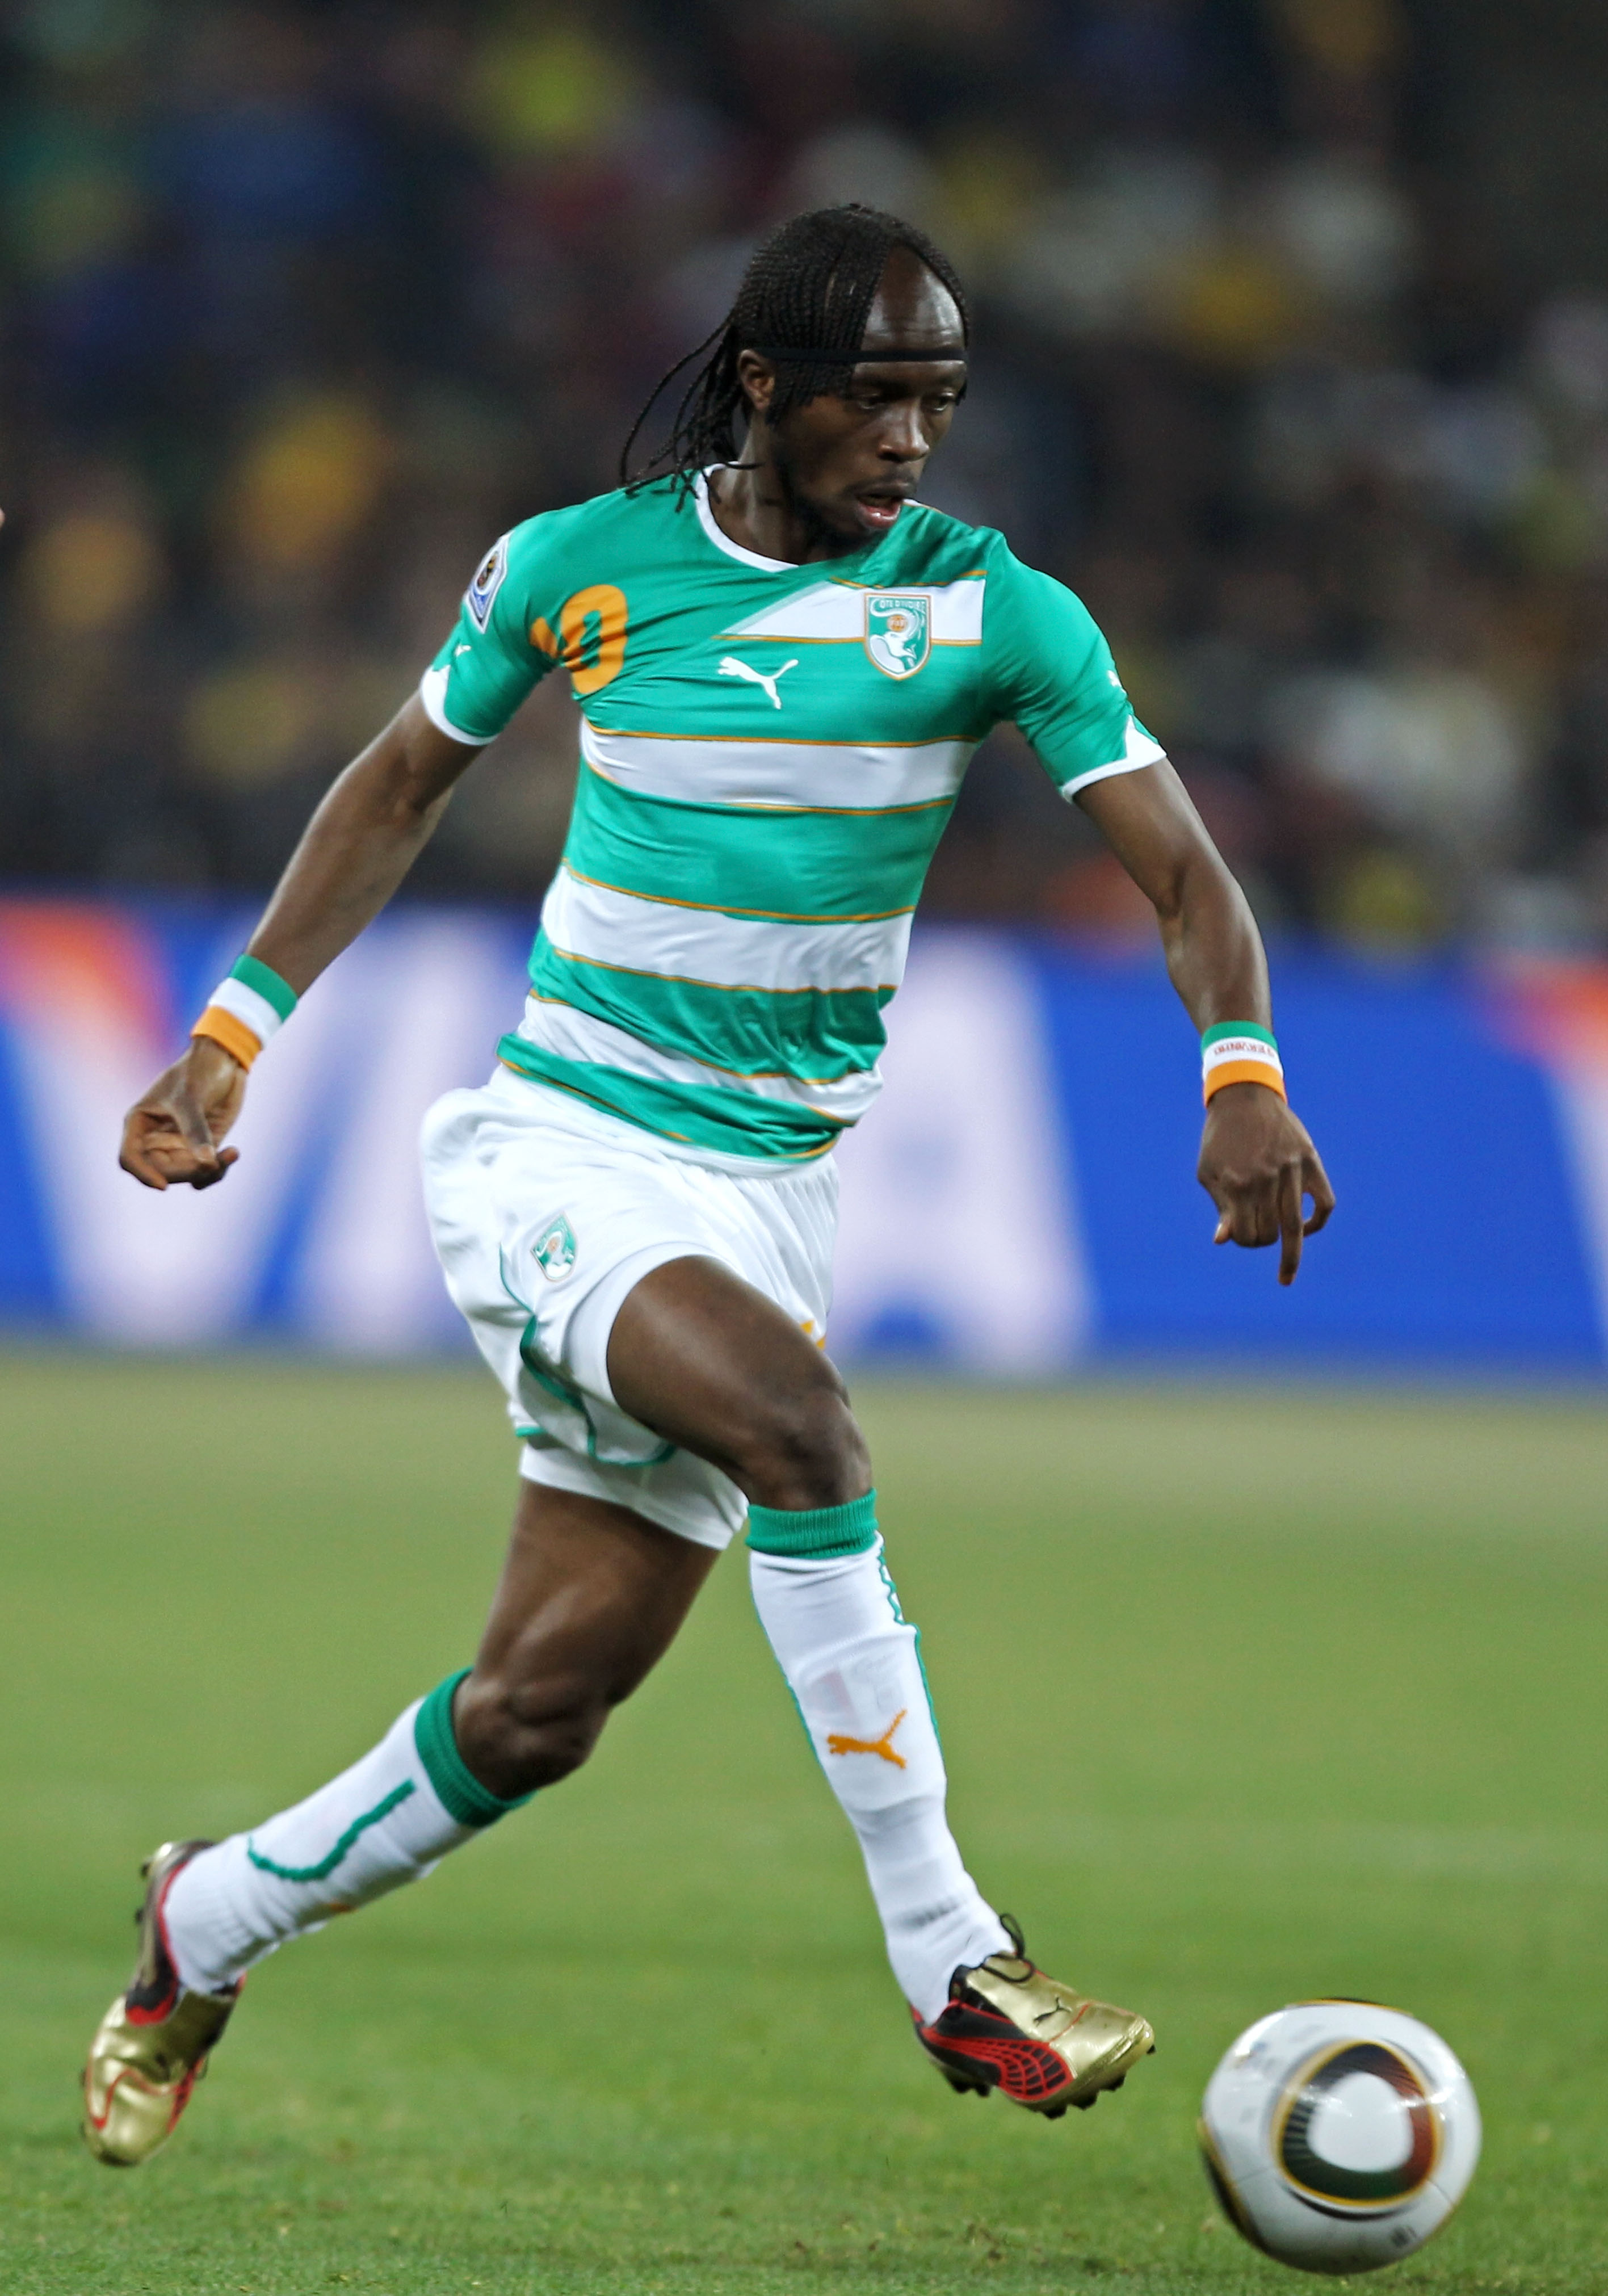 JOHANNESBURG, SOUTH AFRICA - JUNE 20:  Gervinho of Ivory Coast in action during the 2010 FIFA World Cup South Africa Group G match between Brazil and Ivory Coast at Soccer City Stadium on June 20, 2010 in Johannesburg, South Africa.  (Photo by Ian Walton/